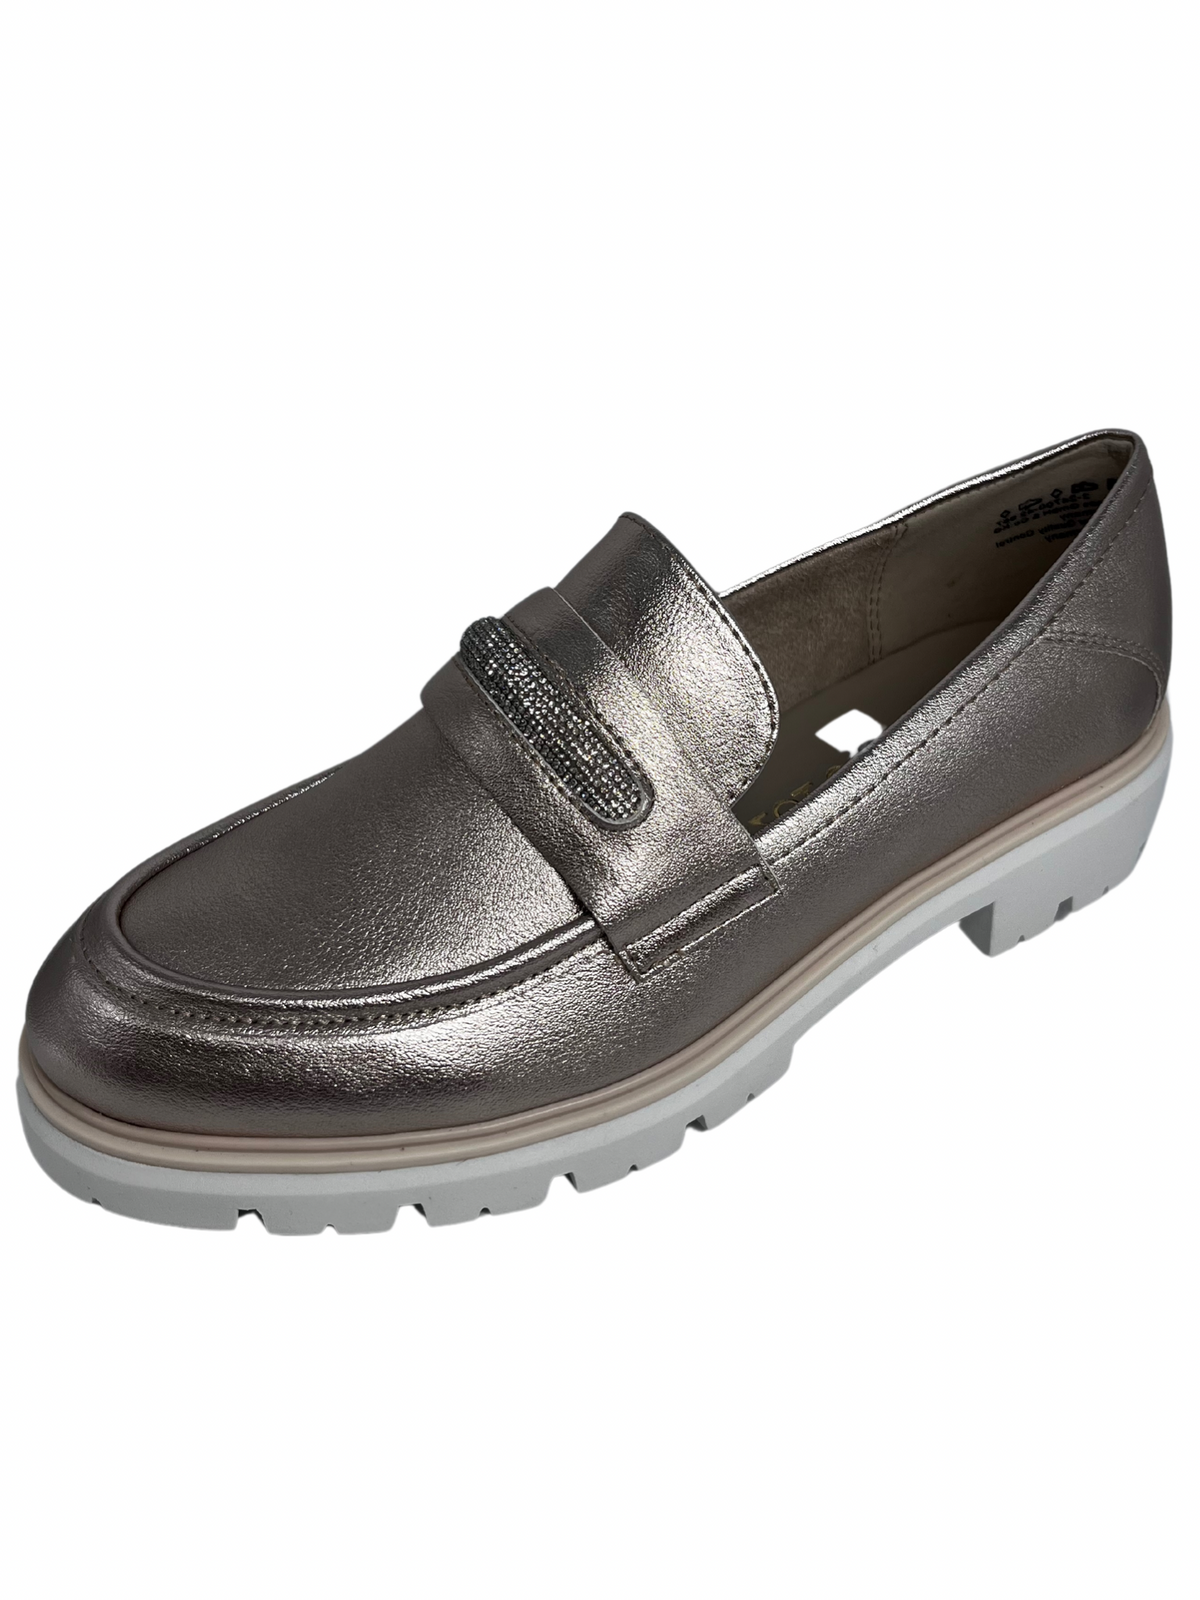 Marco Tozzi Platinum Loafers